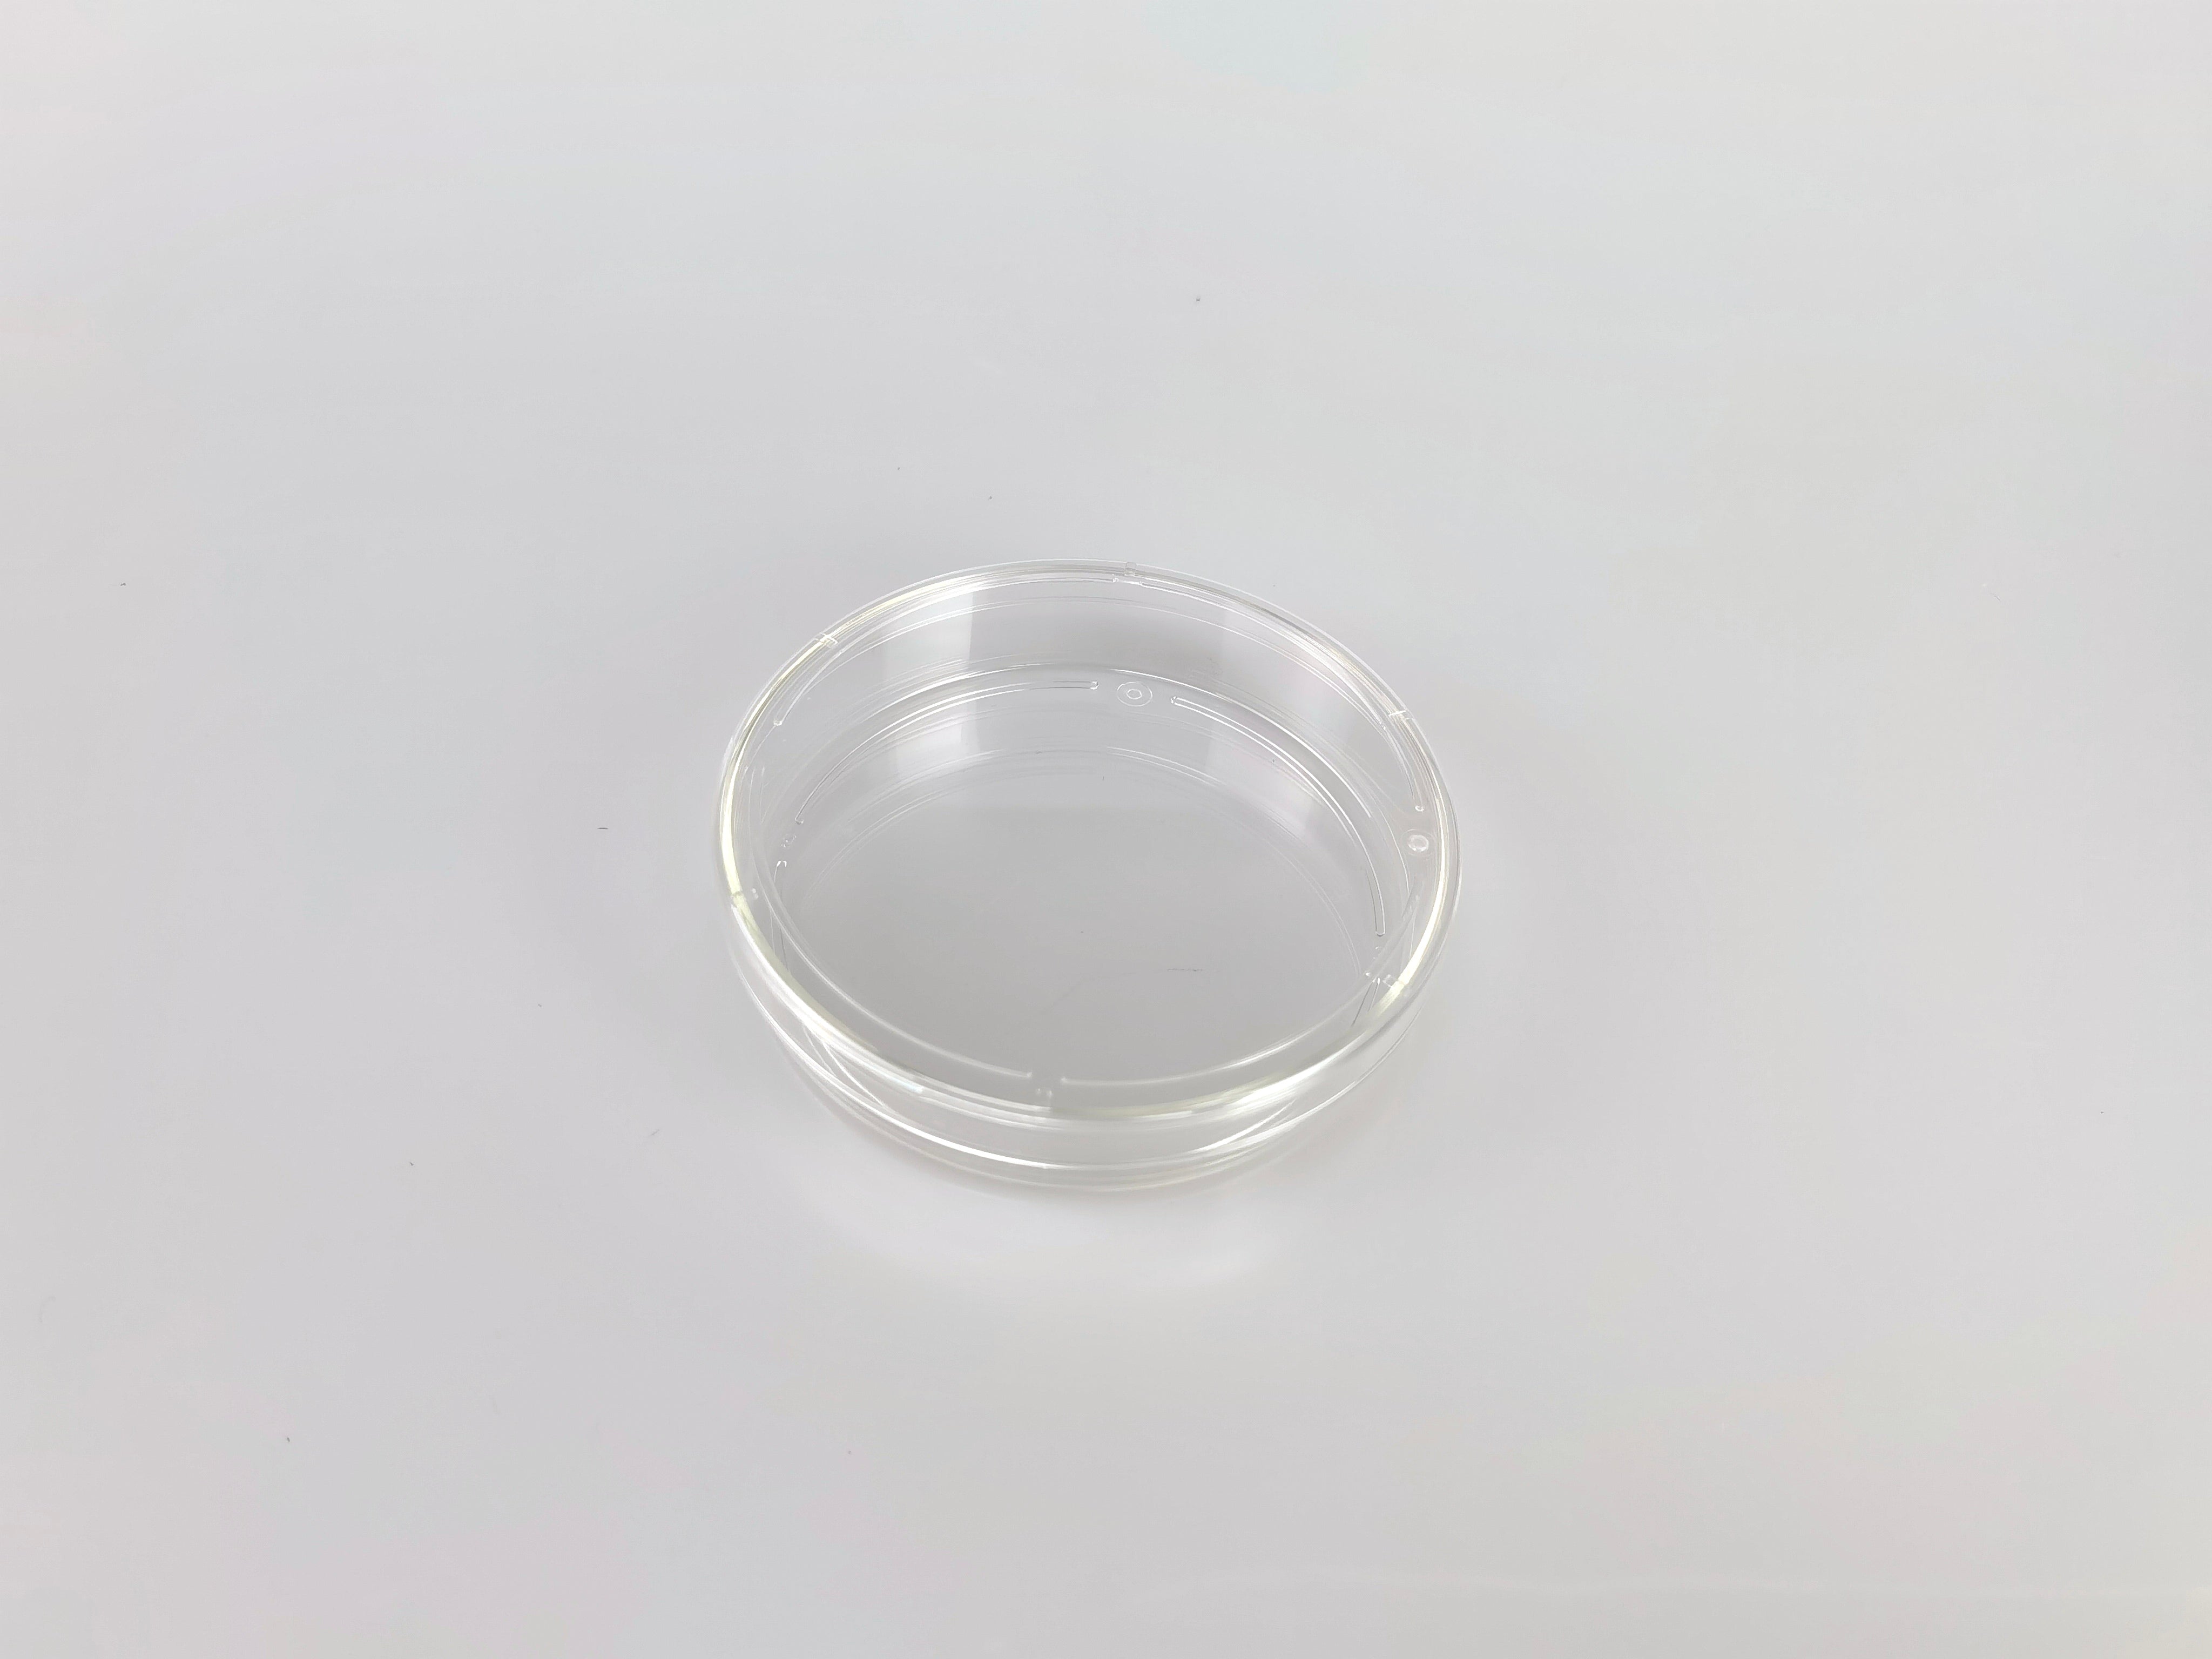 60mm Cell Culture Dish, TC treated